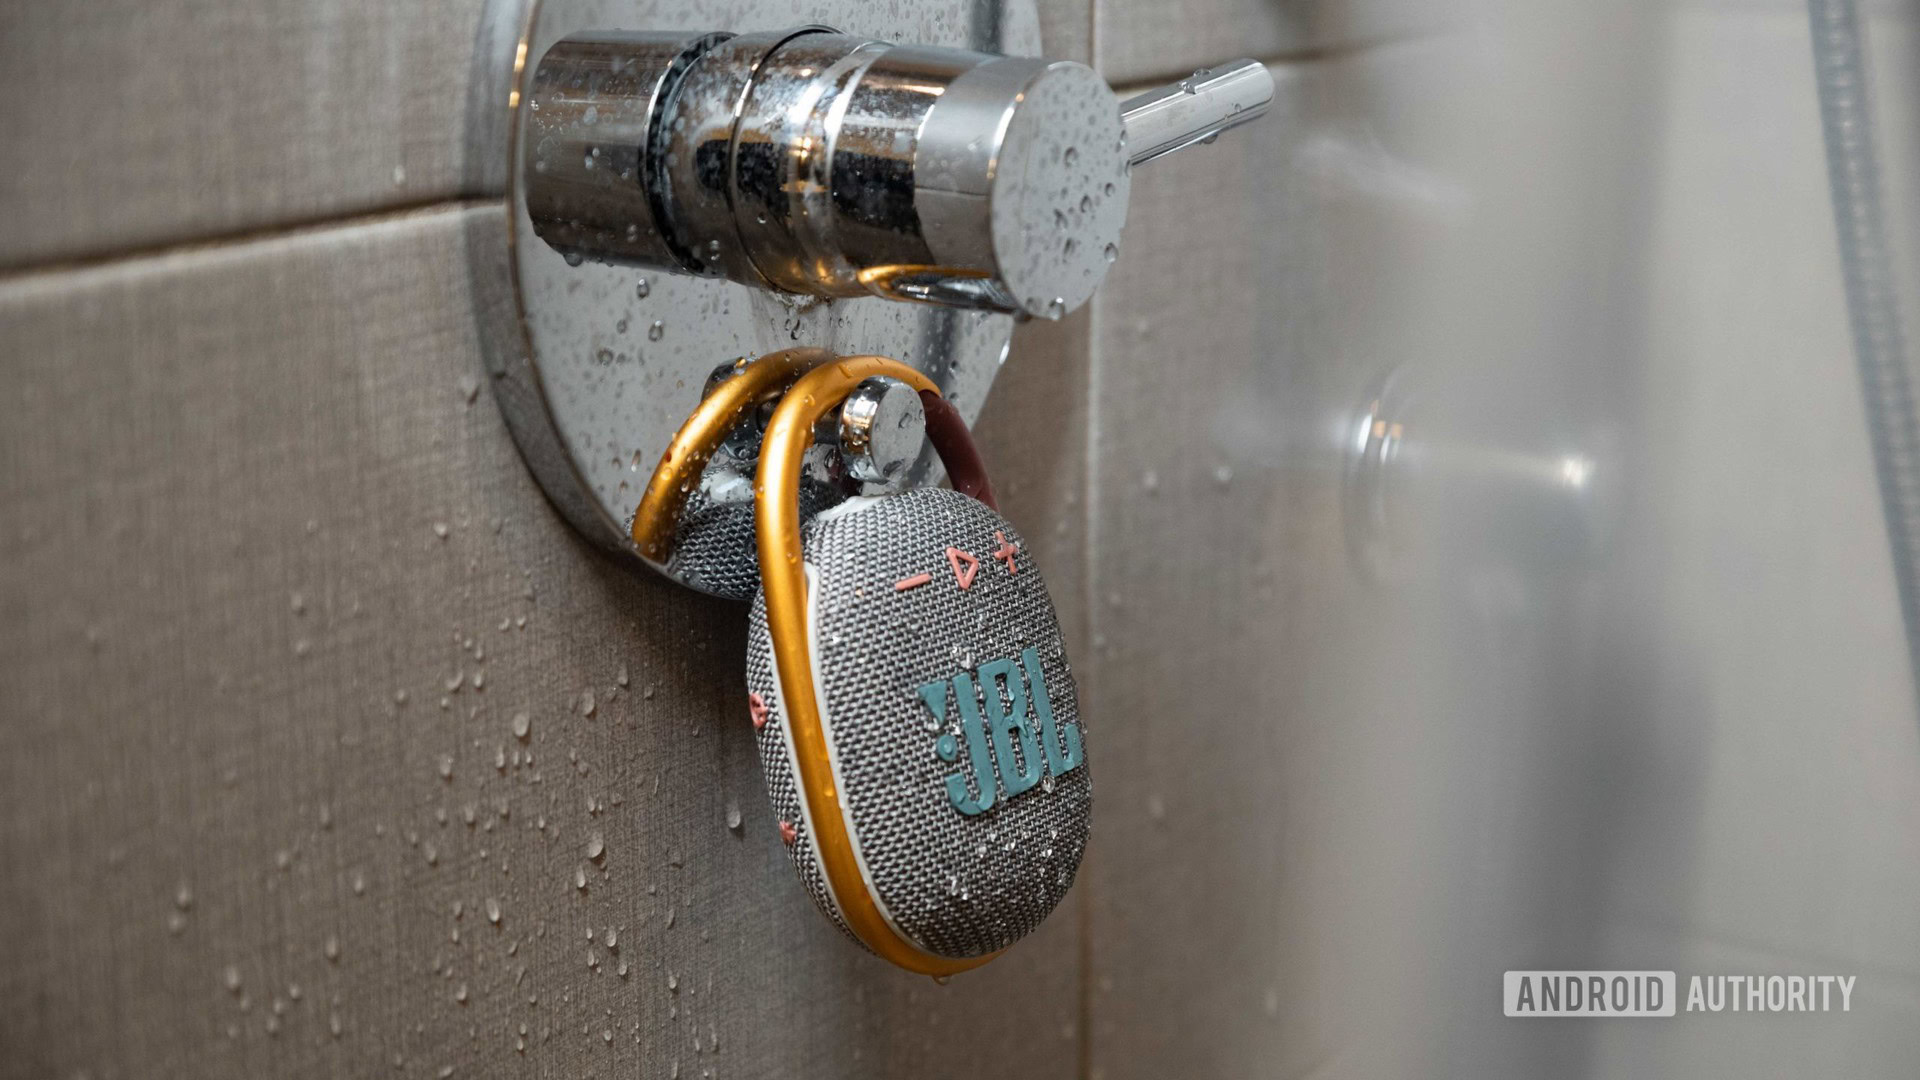 The JBL Clip 4 Bluetooth speaker hands from a shower as it's sprinkled by water.